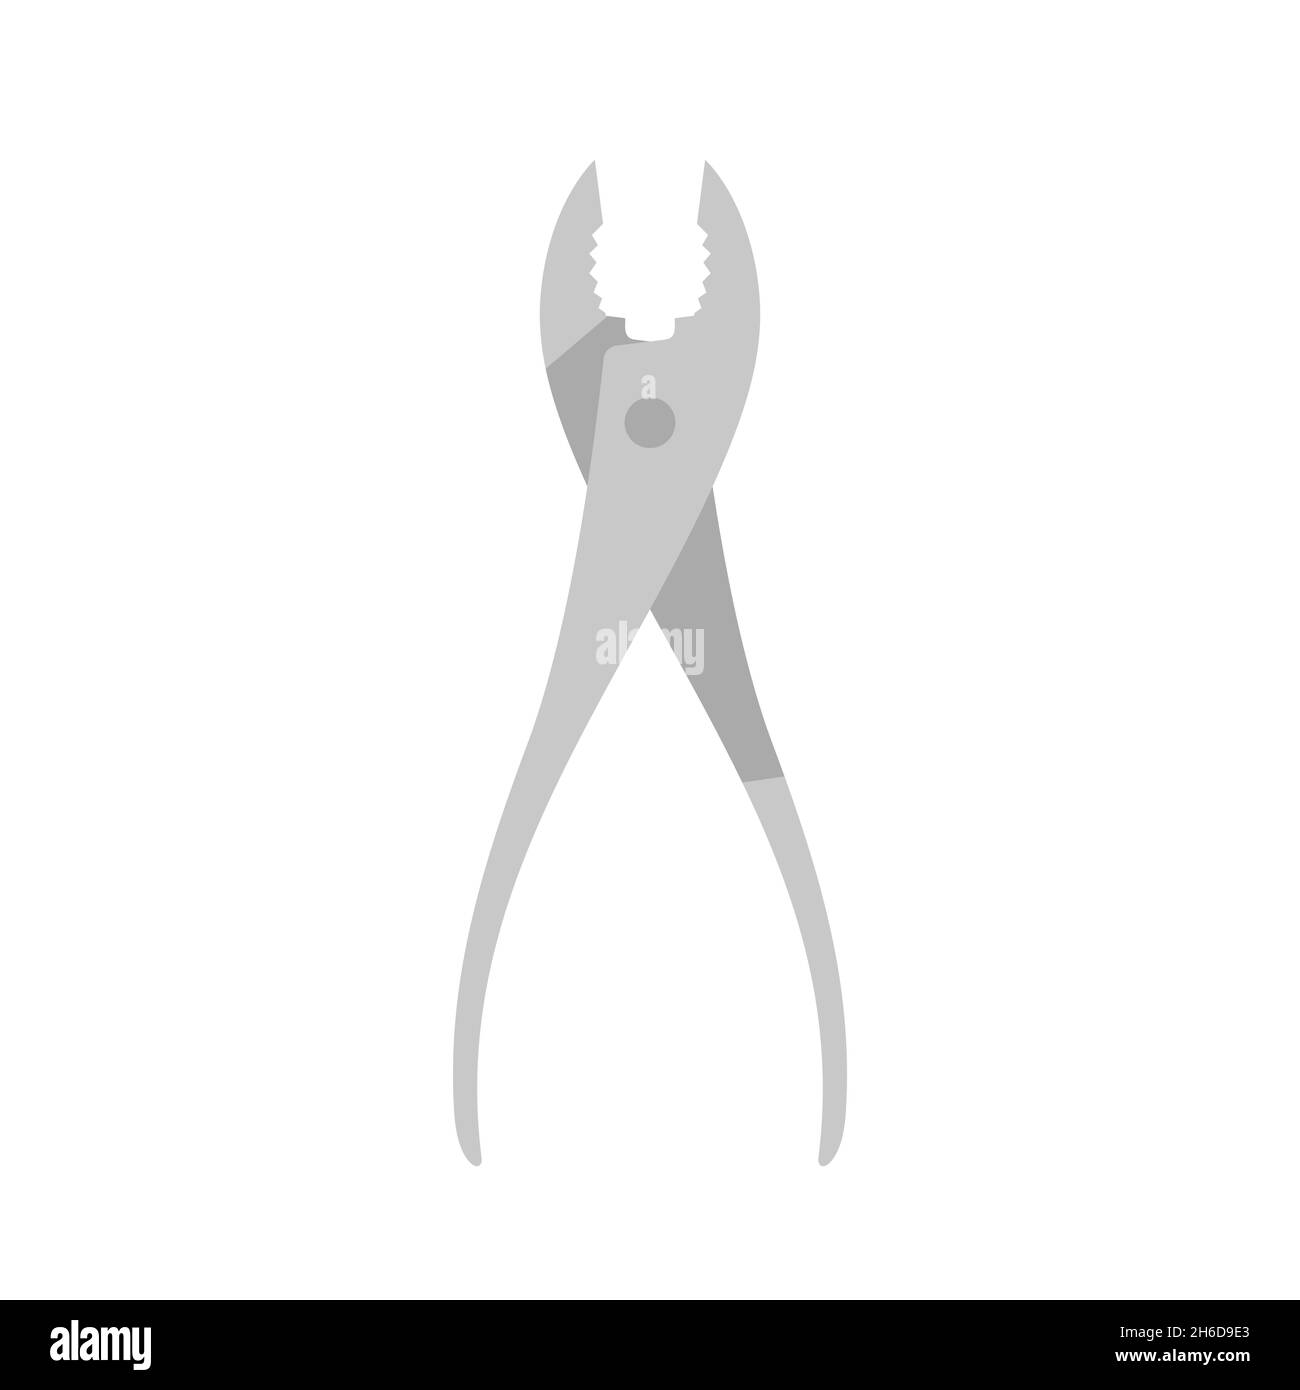 Pliers icon. Hand tool icon. Vector illustration. Flat pliers icon on white background Stock Vector